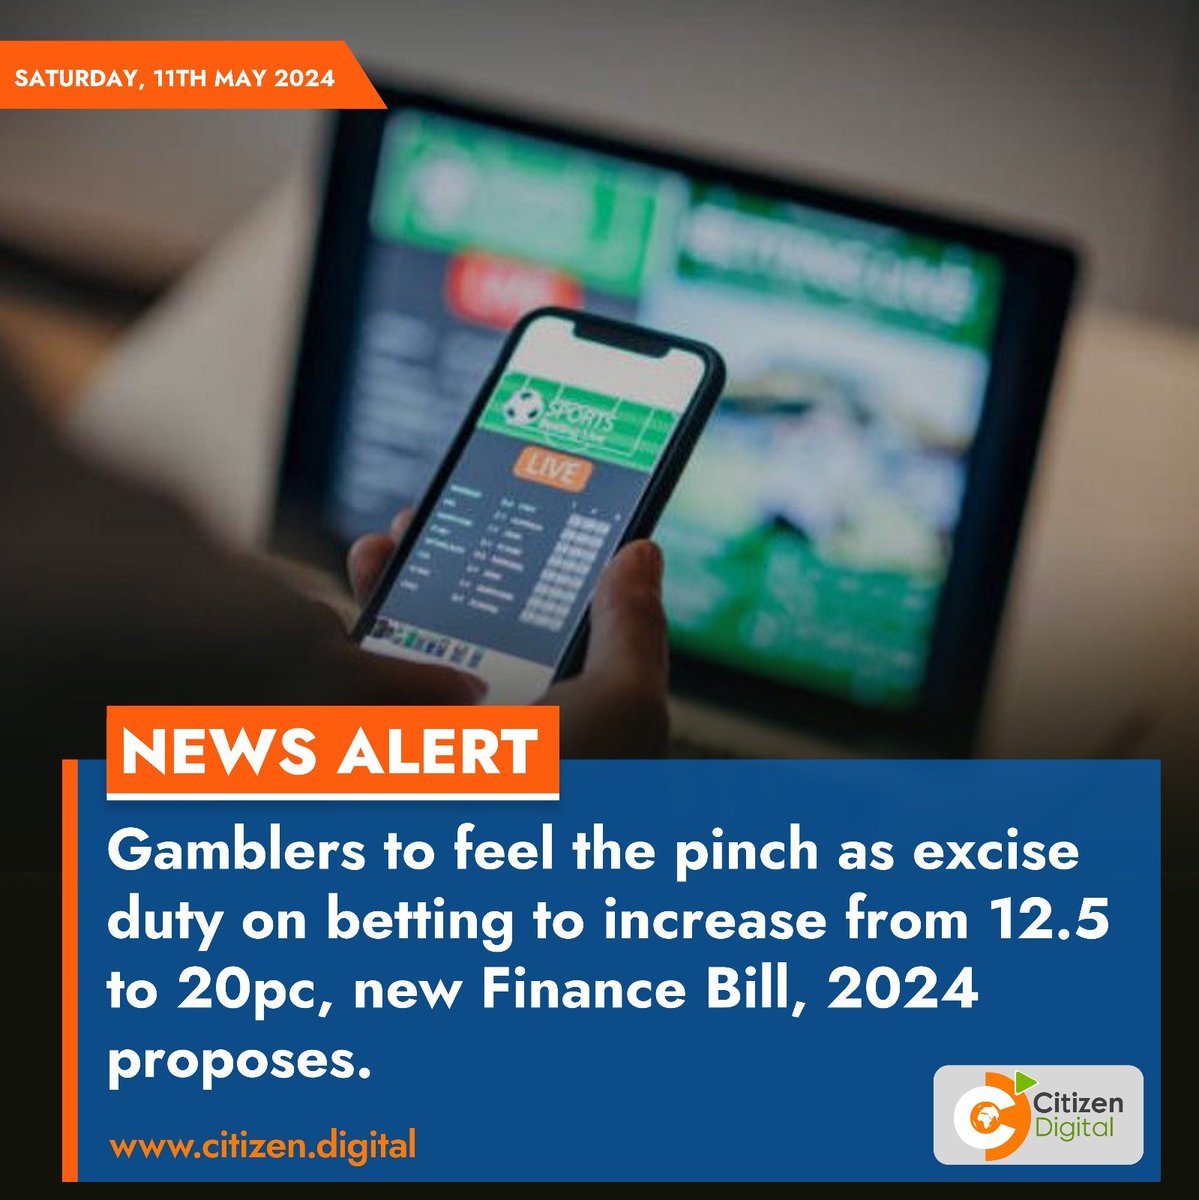 Gamblers to feel the pinch as excise duty on betting to increase from 12.5 to 20pc, new Finance Bill, 2024 proposes.